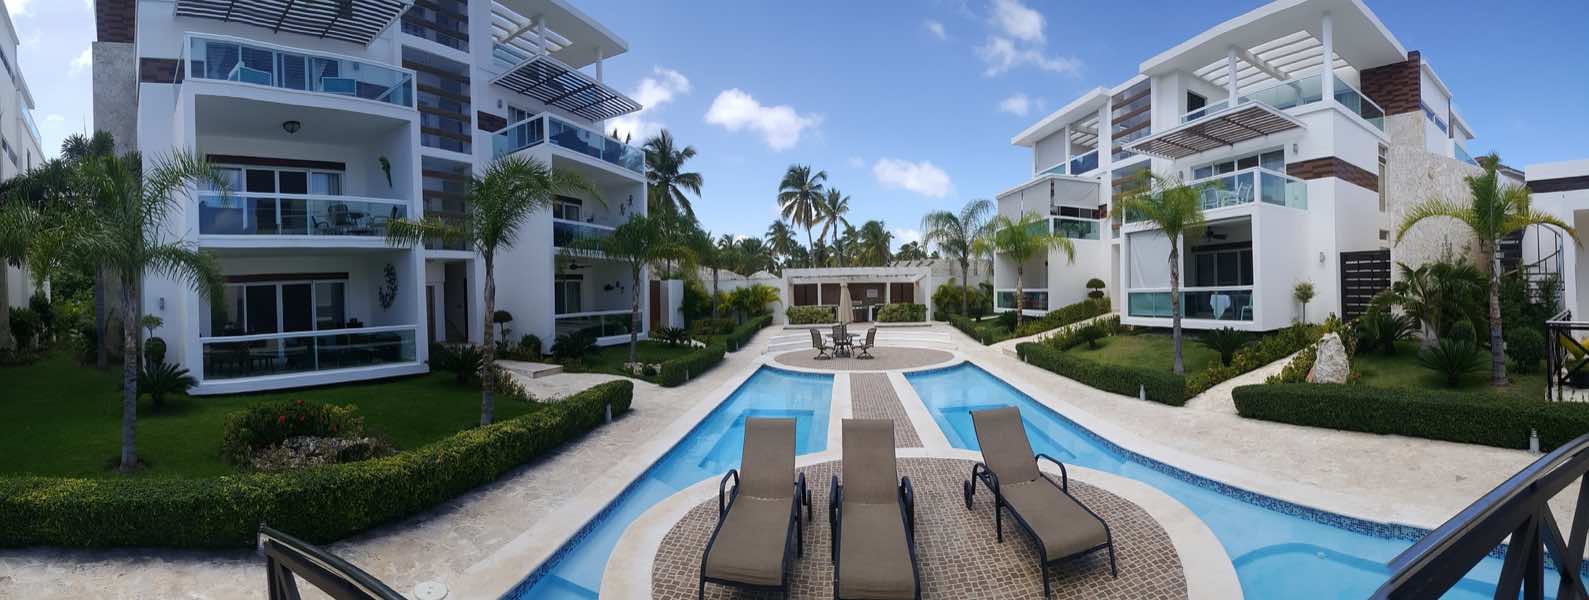 Playa del Carmen Airbnb Investment- view of condos and pool